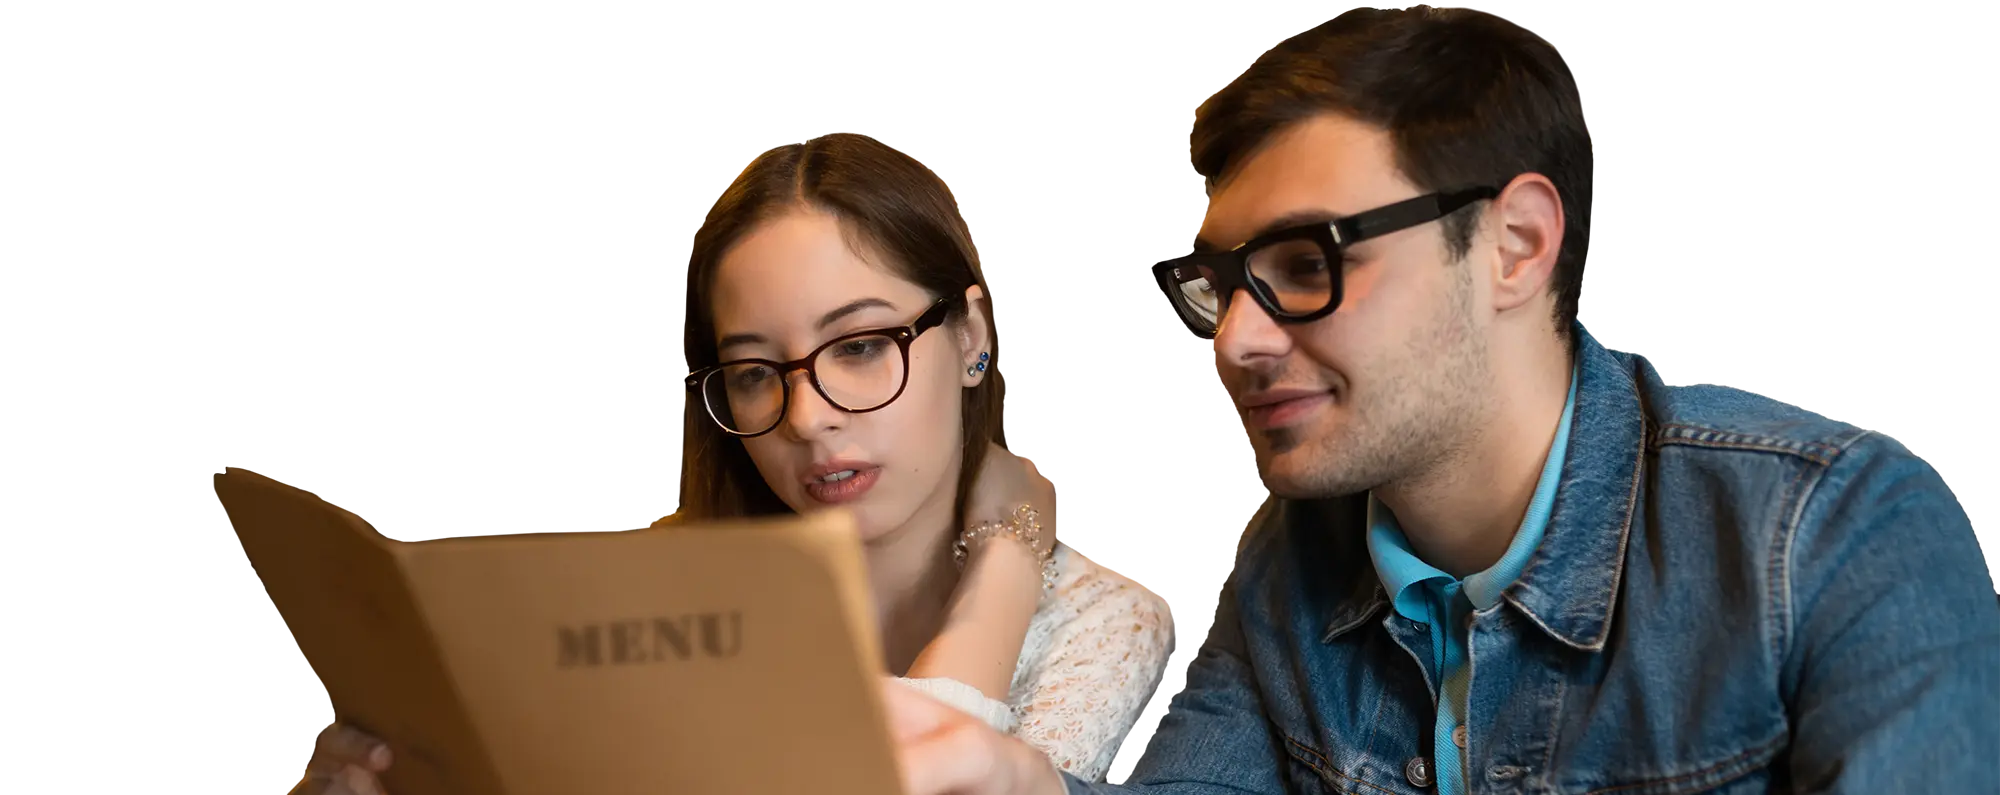 A couple choosing from a menu at a cafe.